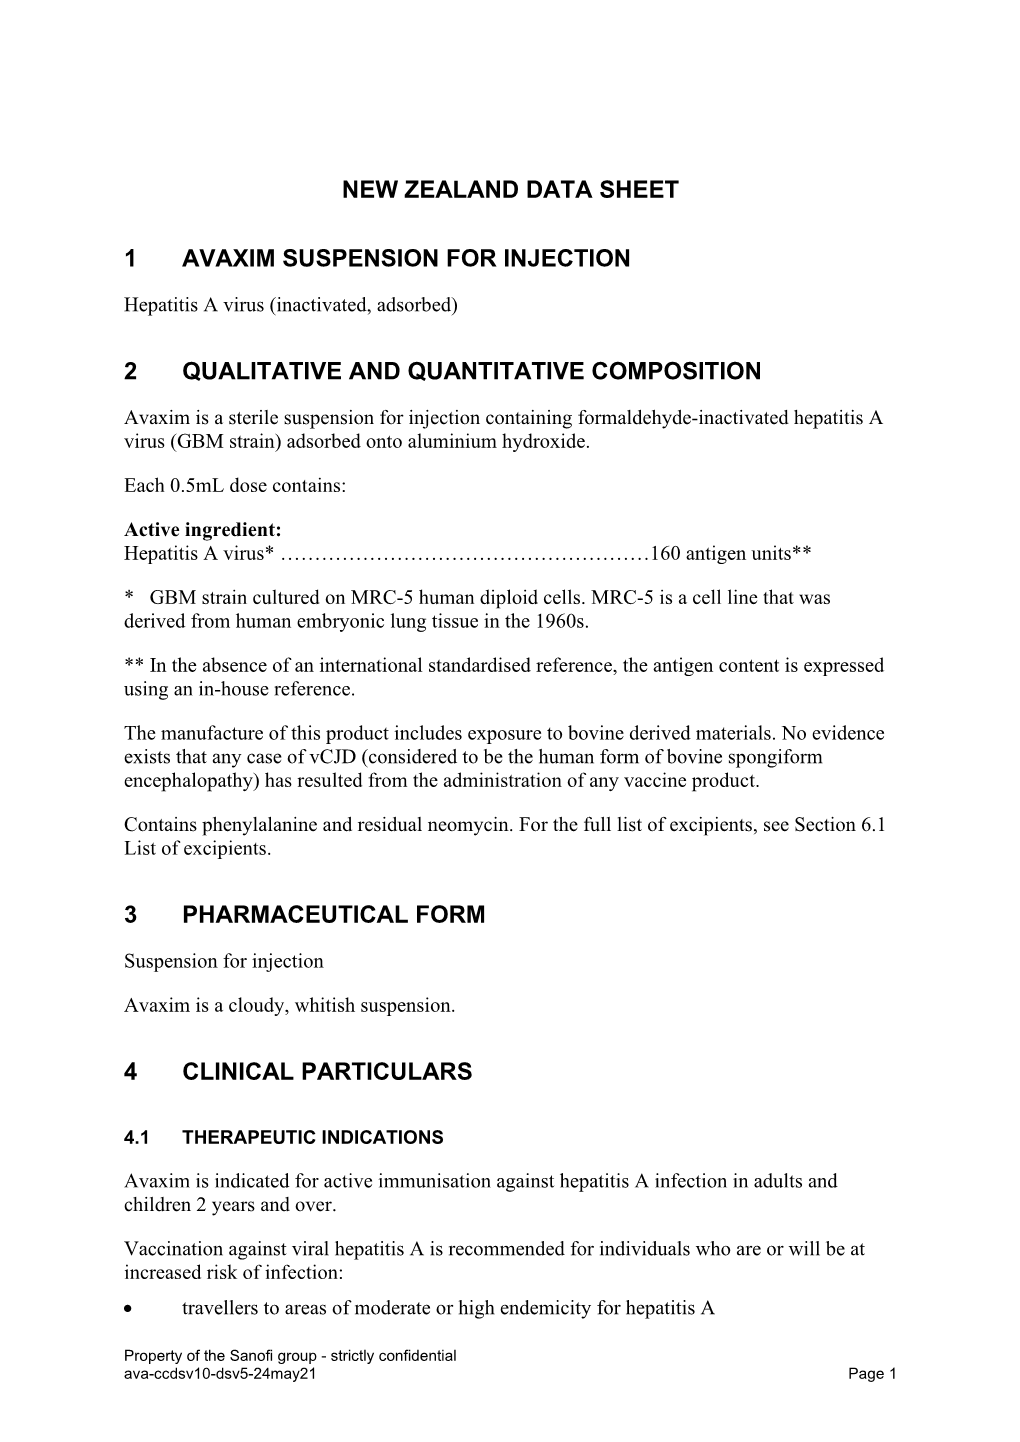 New Zealand Data Sheet 1 Avaxim Suspension for Injection 2 Qualitative and Quantitative Composition 3 Pharmaceutical Form 4 Clin